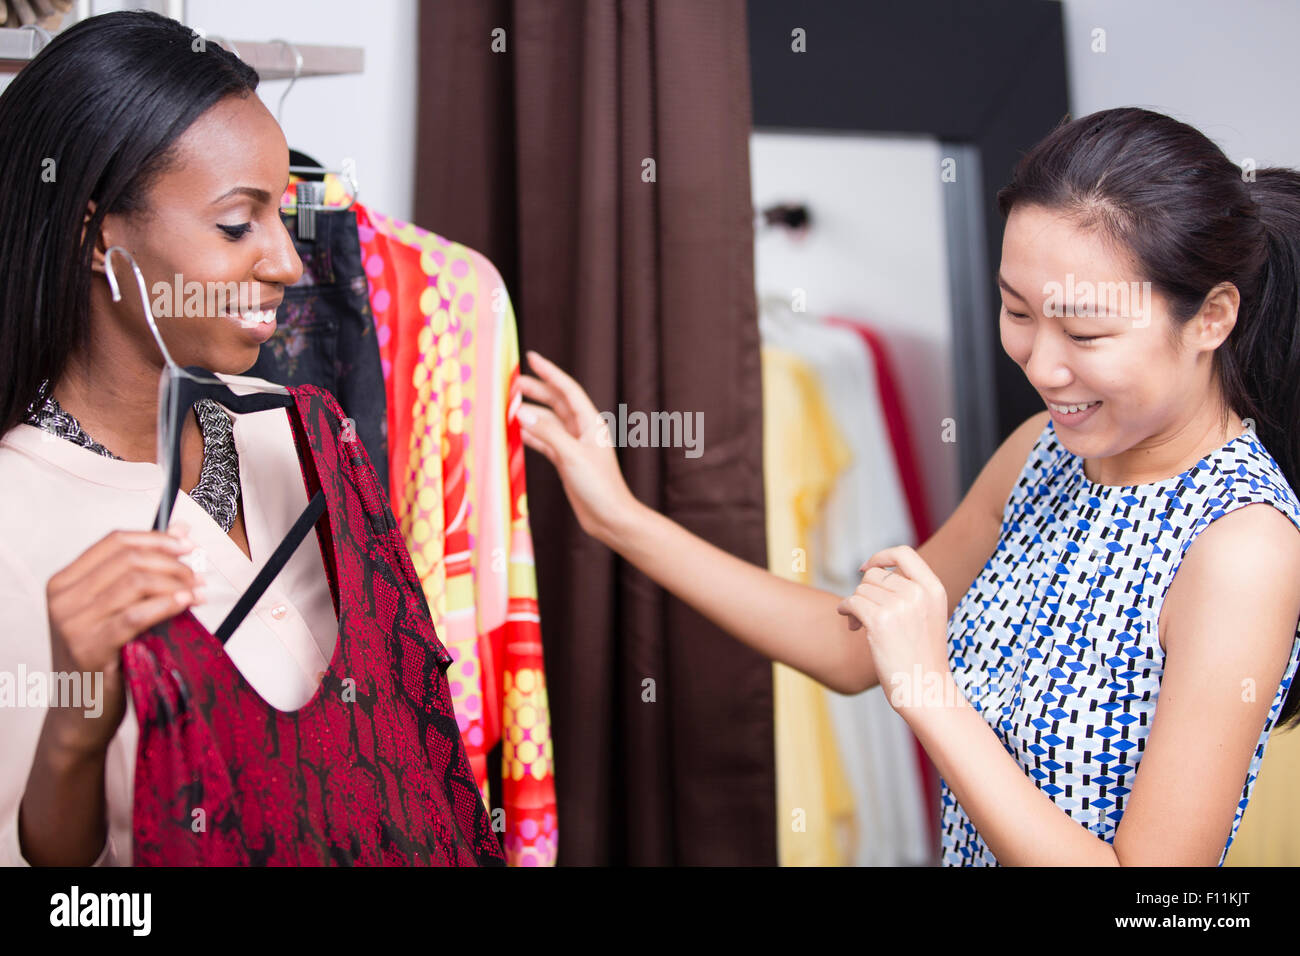 Women shopping in clothing store Banque D'Images